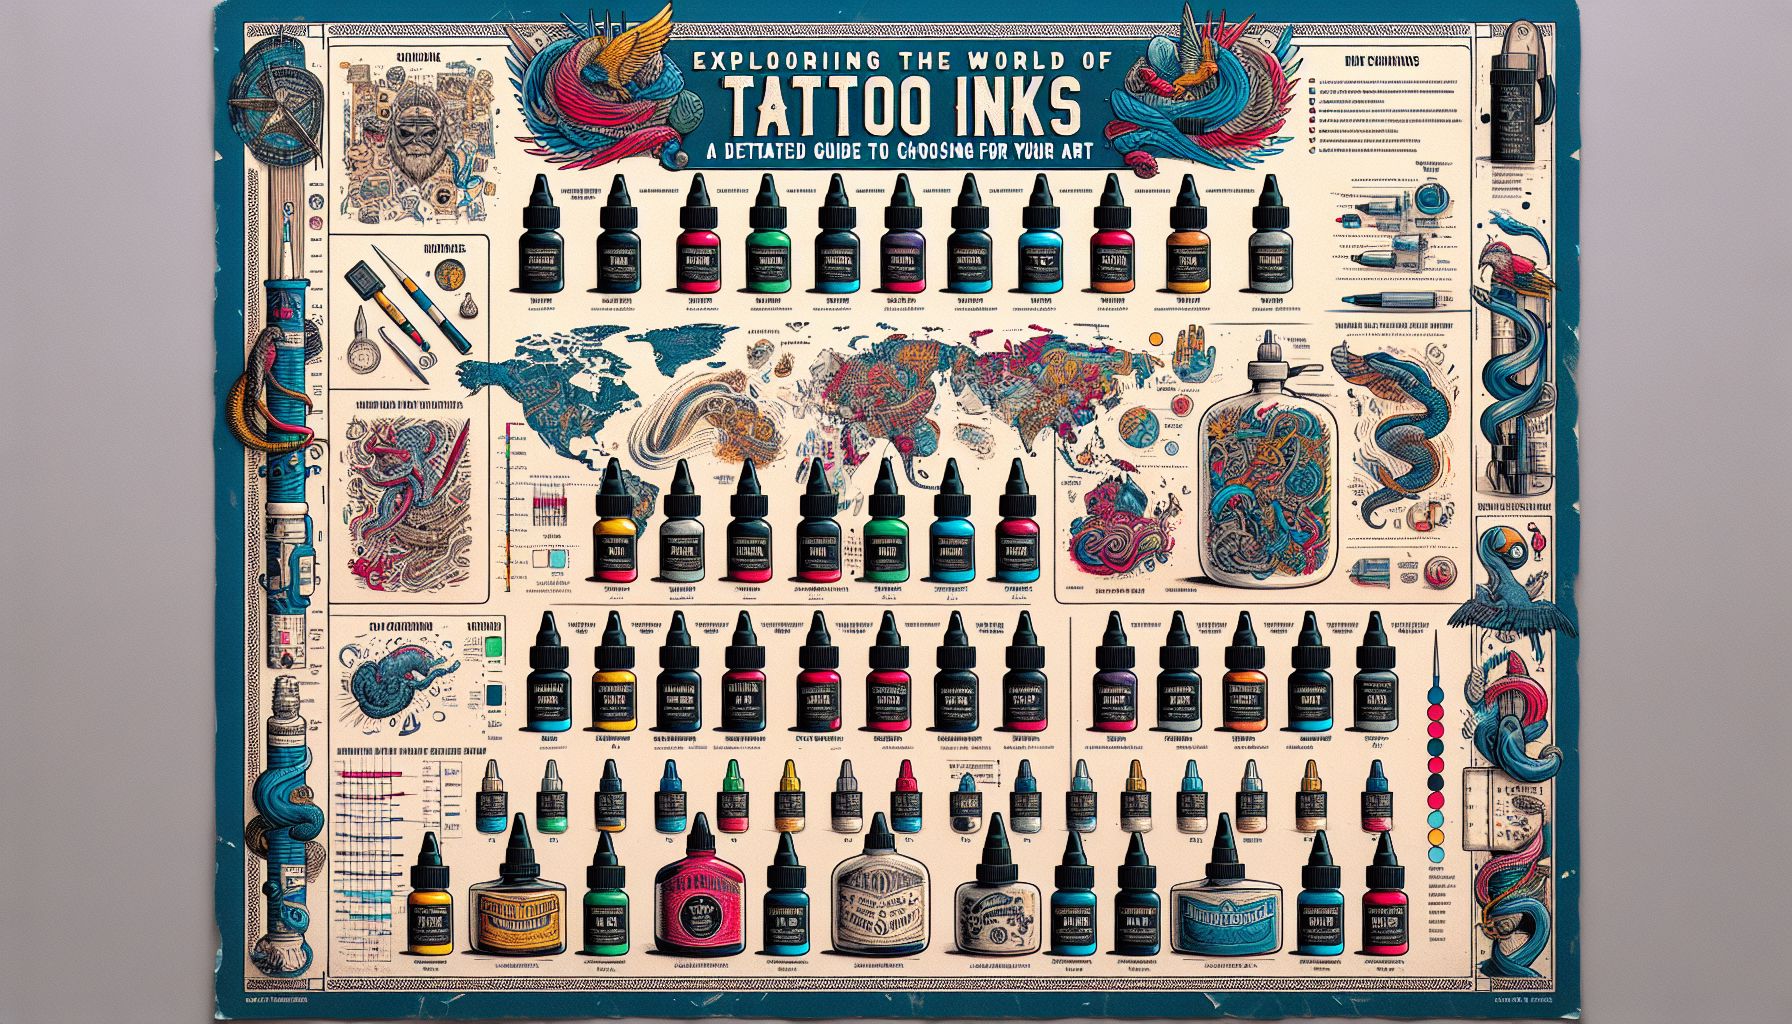 Exploring the World of Tattoo Inks: A Detailed Guide to Choosing the Best for Your Art